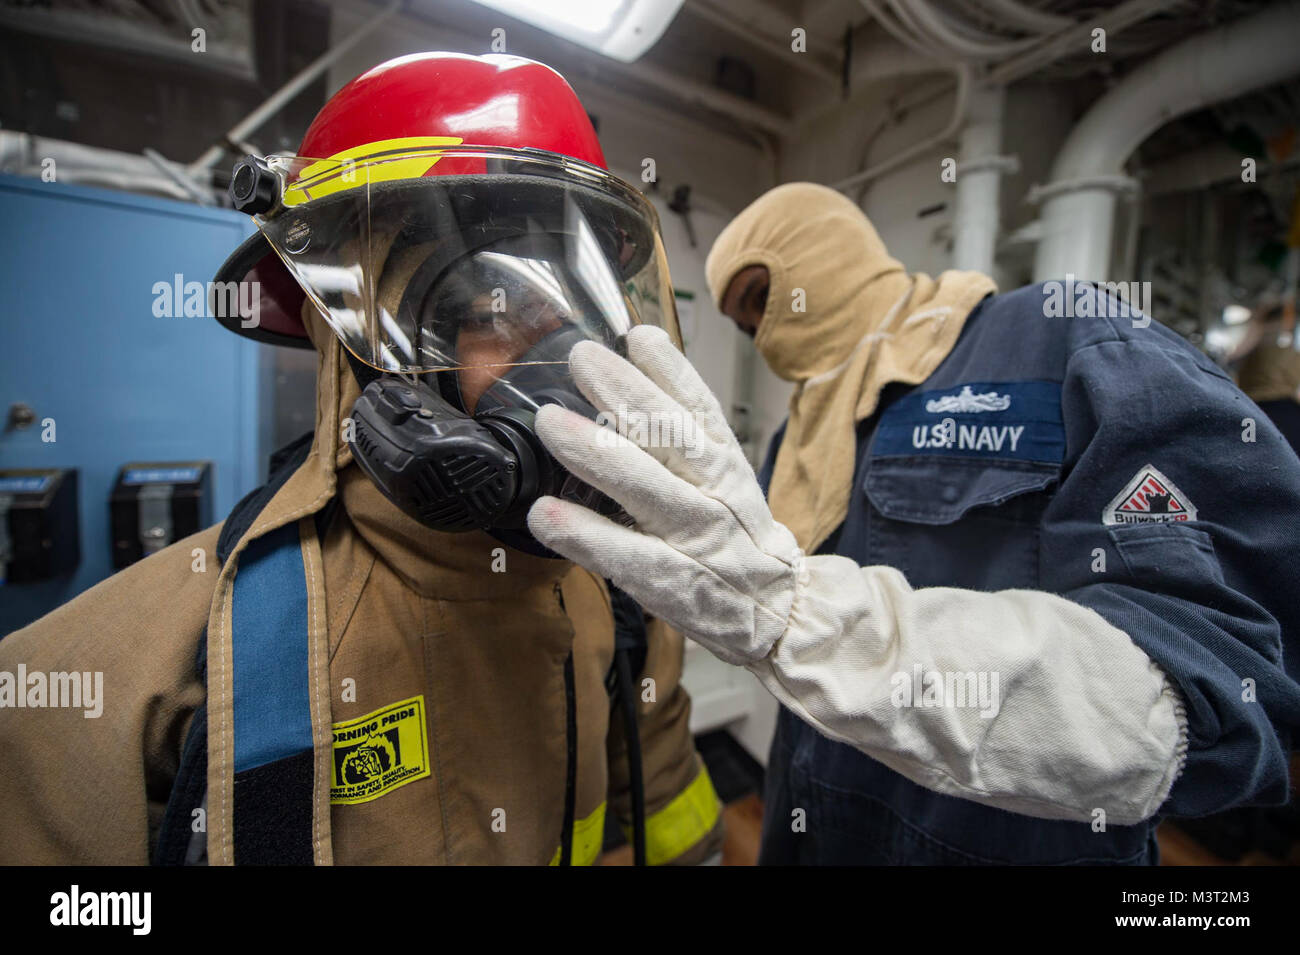 160311-N-MD297-110 PACIFIC OCEAN (March 11, 2016) - Machinist's Mate 2nd Class Daurone Willis inspects Gas Turbine Systems Technician (Mechanical) Fireman John Turner for the proper wear of a firefighting ensemble during a main space fire drill aboard Arleigh Burke-class guided-missile destroyer USS Lassen (DDG 82). Lassen is deployed to the U.S. 4th Fleet area of responsibility supporting law enforcement operations as part of Operation Martillo. (U.S. Navy photo by Mass Communication Specialist 2nd Class Huey D. Younger Jr./Released) 160311-N-MD297-110 by U.S. Naval Forces Southern Command  U Stock Photo